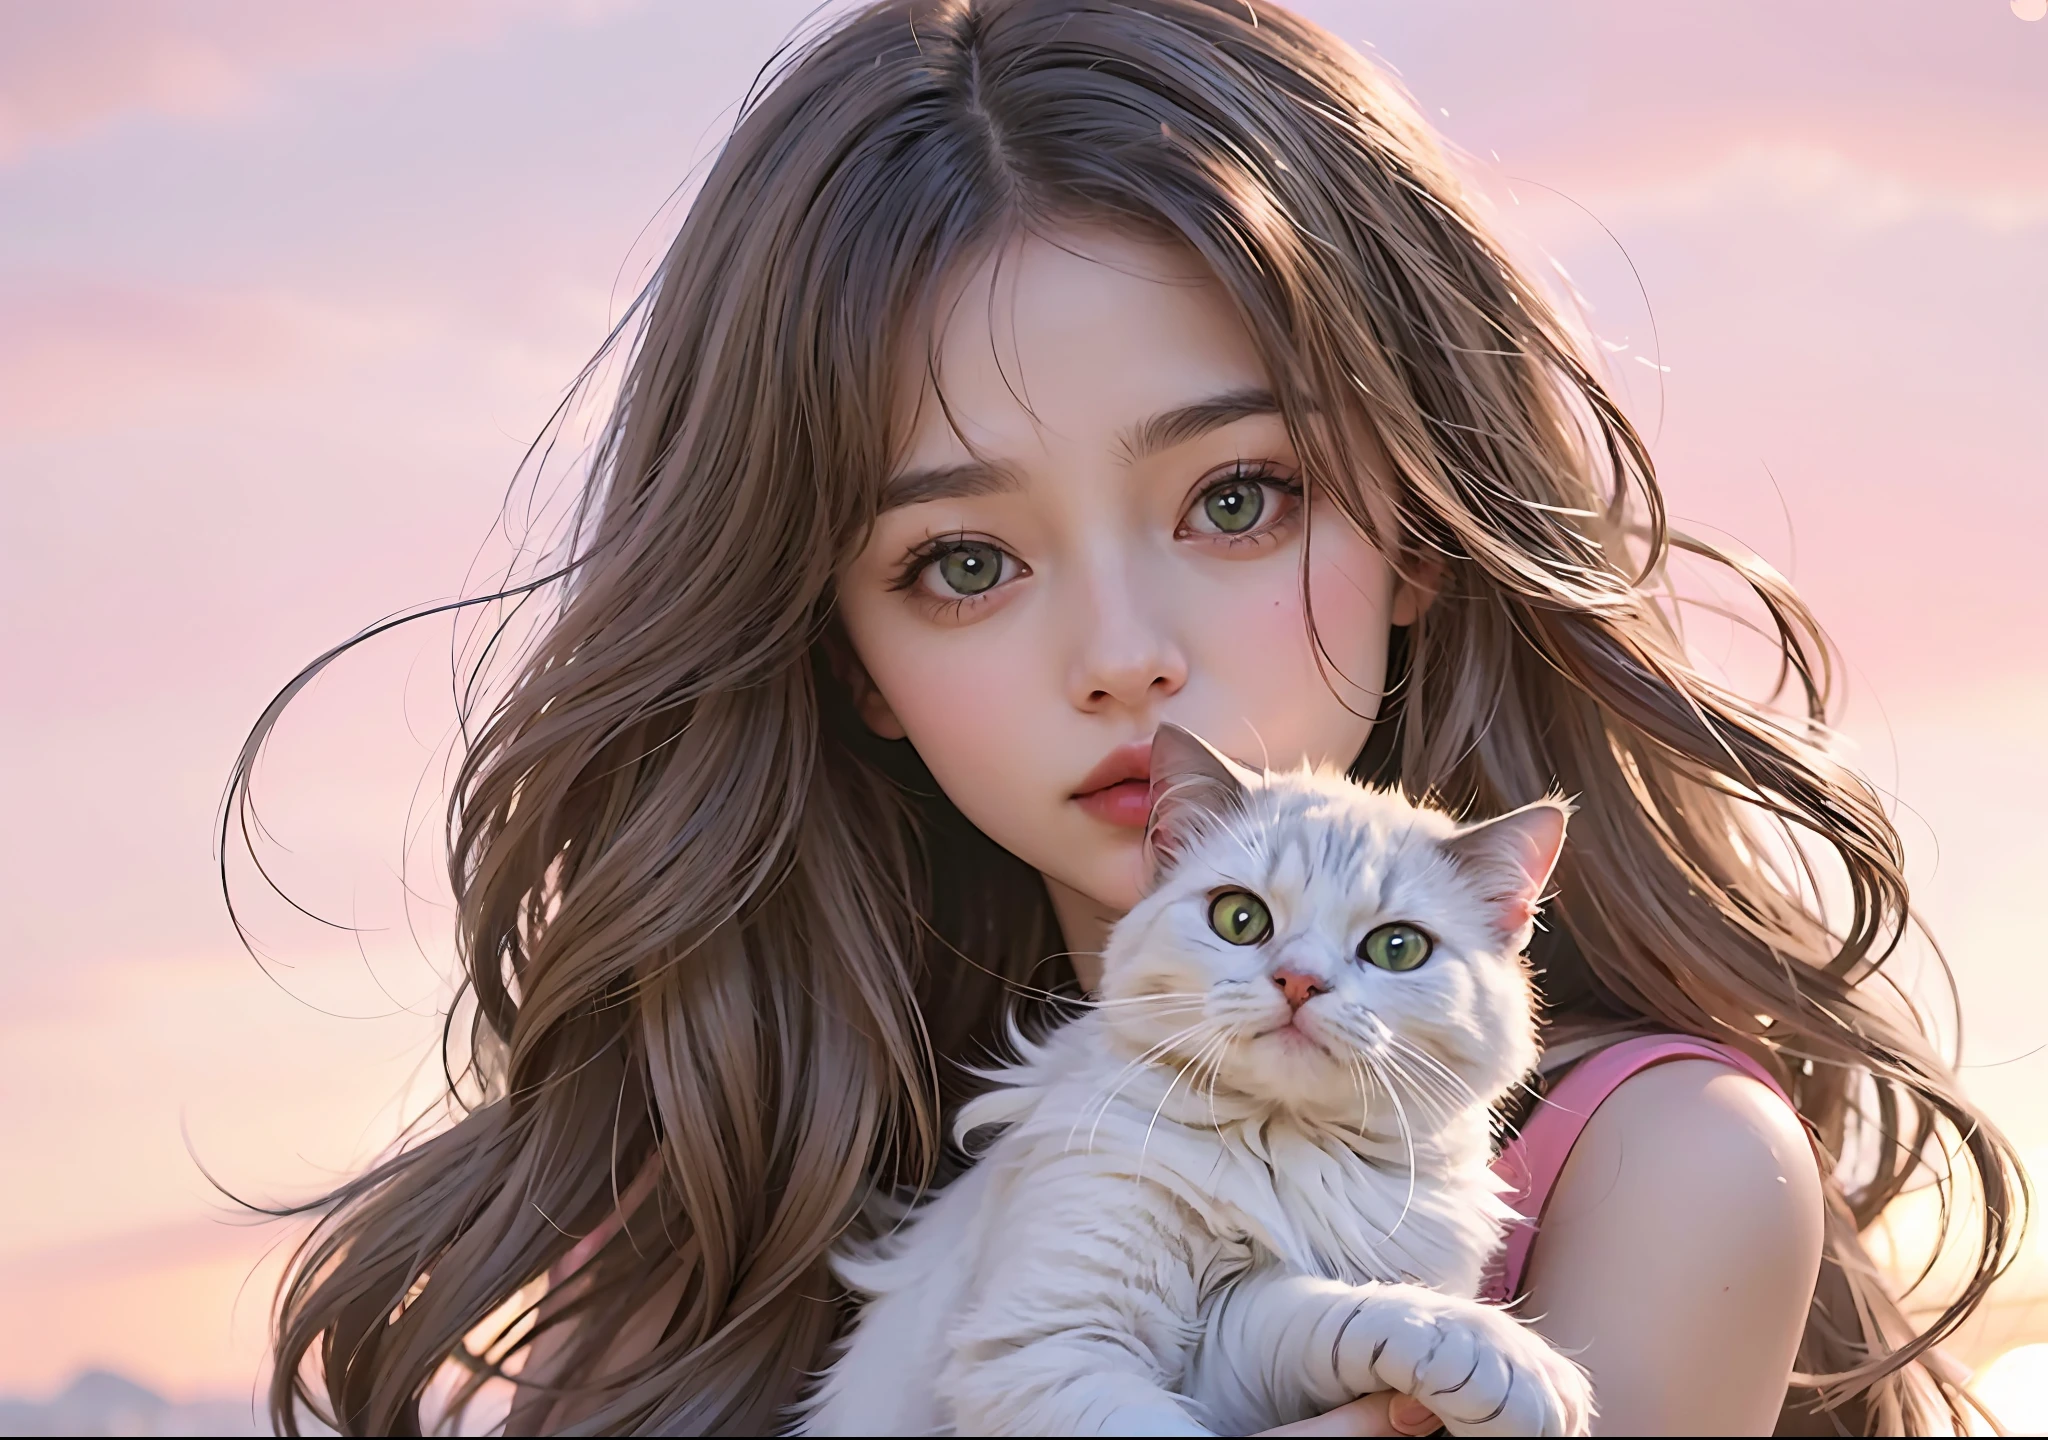 anime девочка with long hair holding a белый кот in her arms, very beautiful cute котдевочка, beautiful anime котдевочка, cute anime котдевочка, Гувейз, very beautiful anime кот девочка, милый художественный стиль, beautiful young котдевочка, белый ( кот ) девочка, attractive кот девочка, artwork in the style of Гувейз, белый кот девочка, anime котдевочка